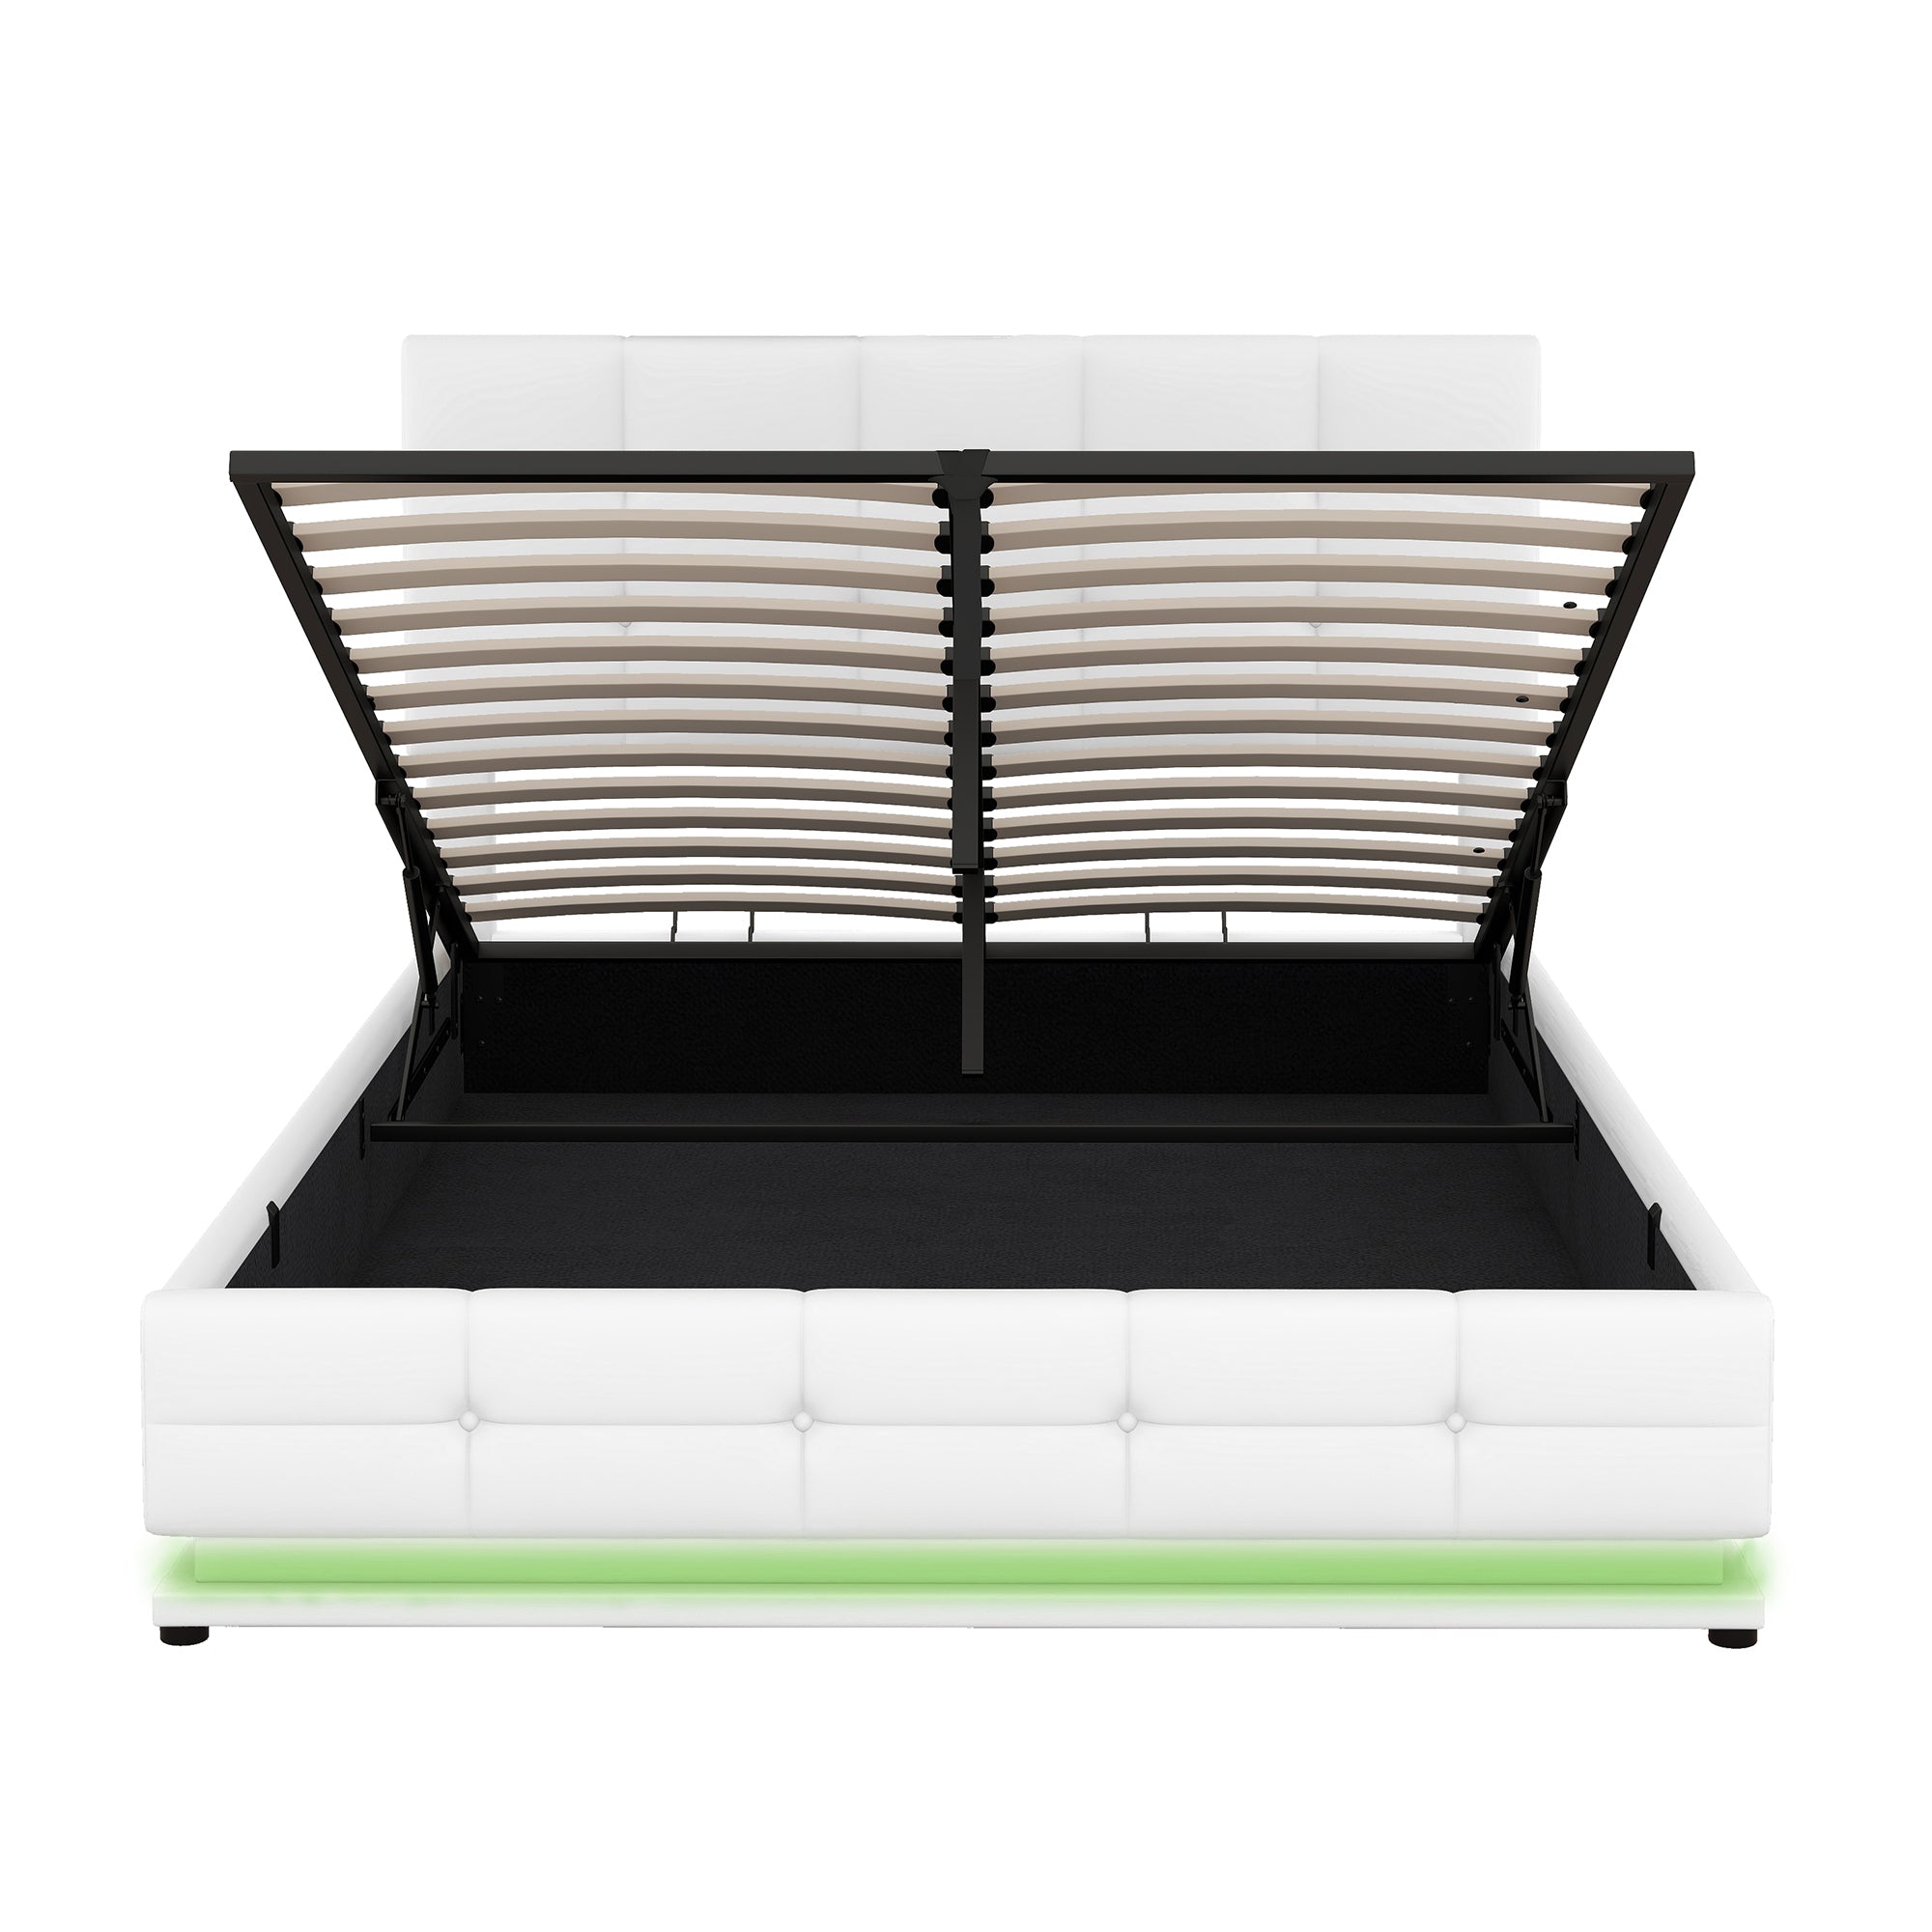 Kosmo Full Size Hydraulic Lift Storage Platform Bed with LED Lights and USB Charger Upholstered with Faux Leather